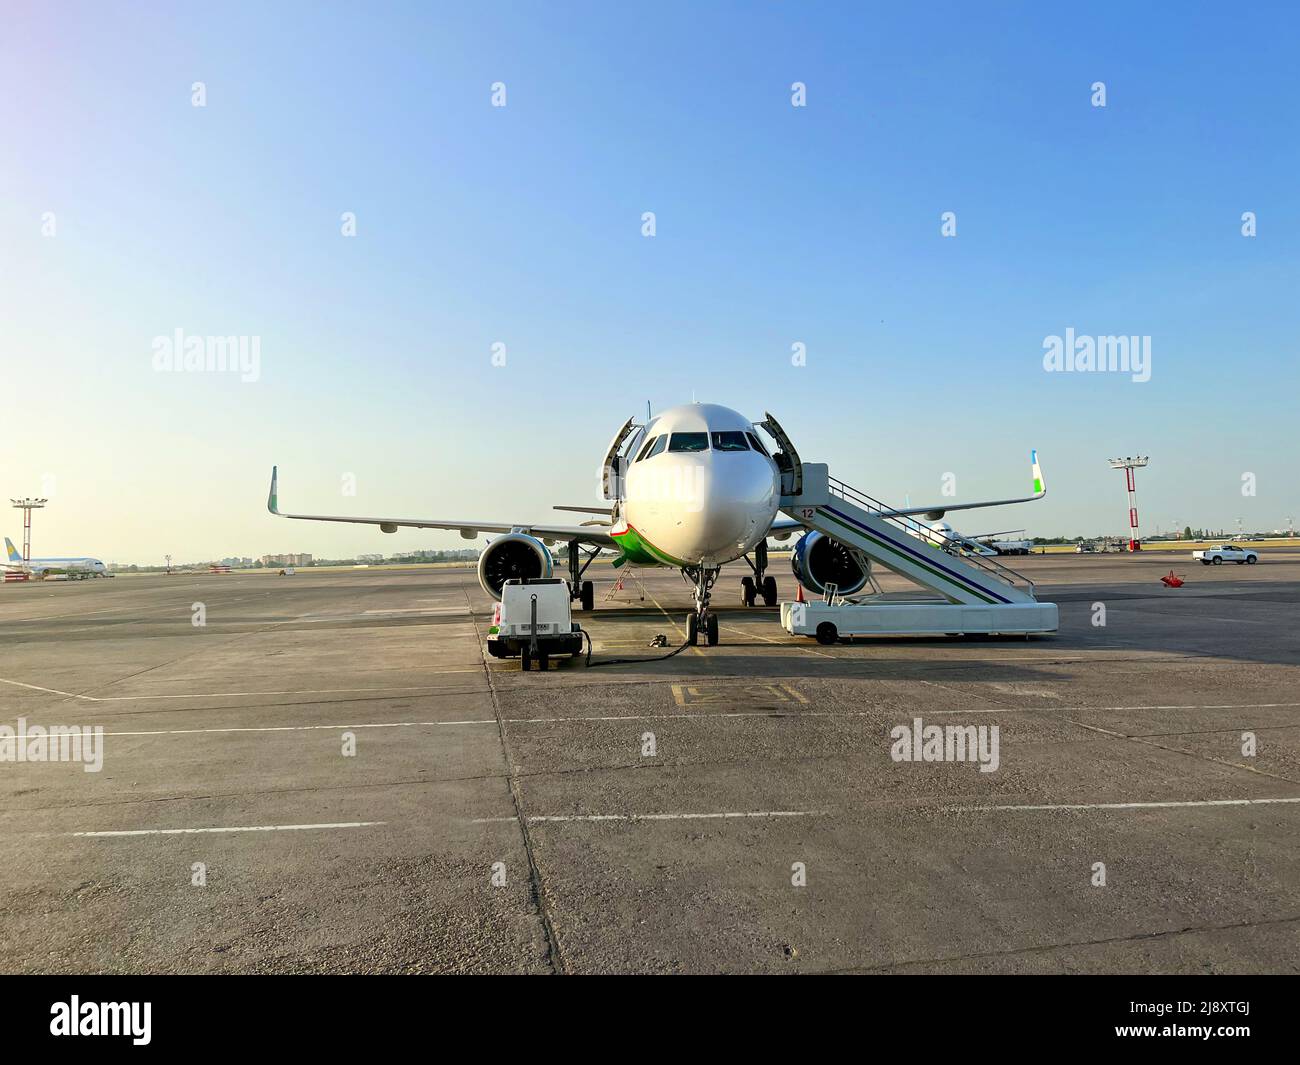 passenger plane is parked at the airport Stock Photo